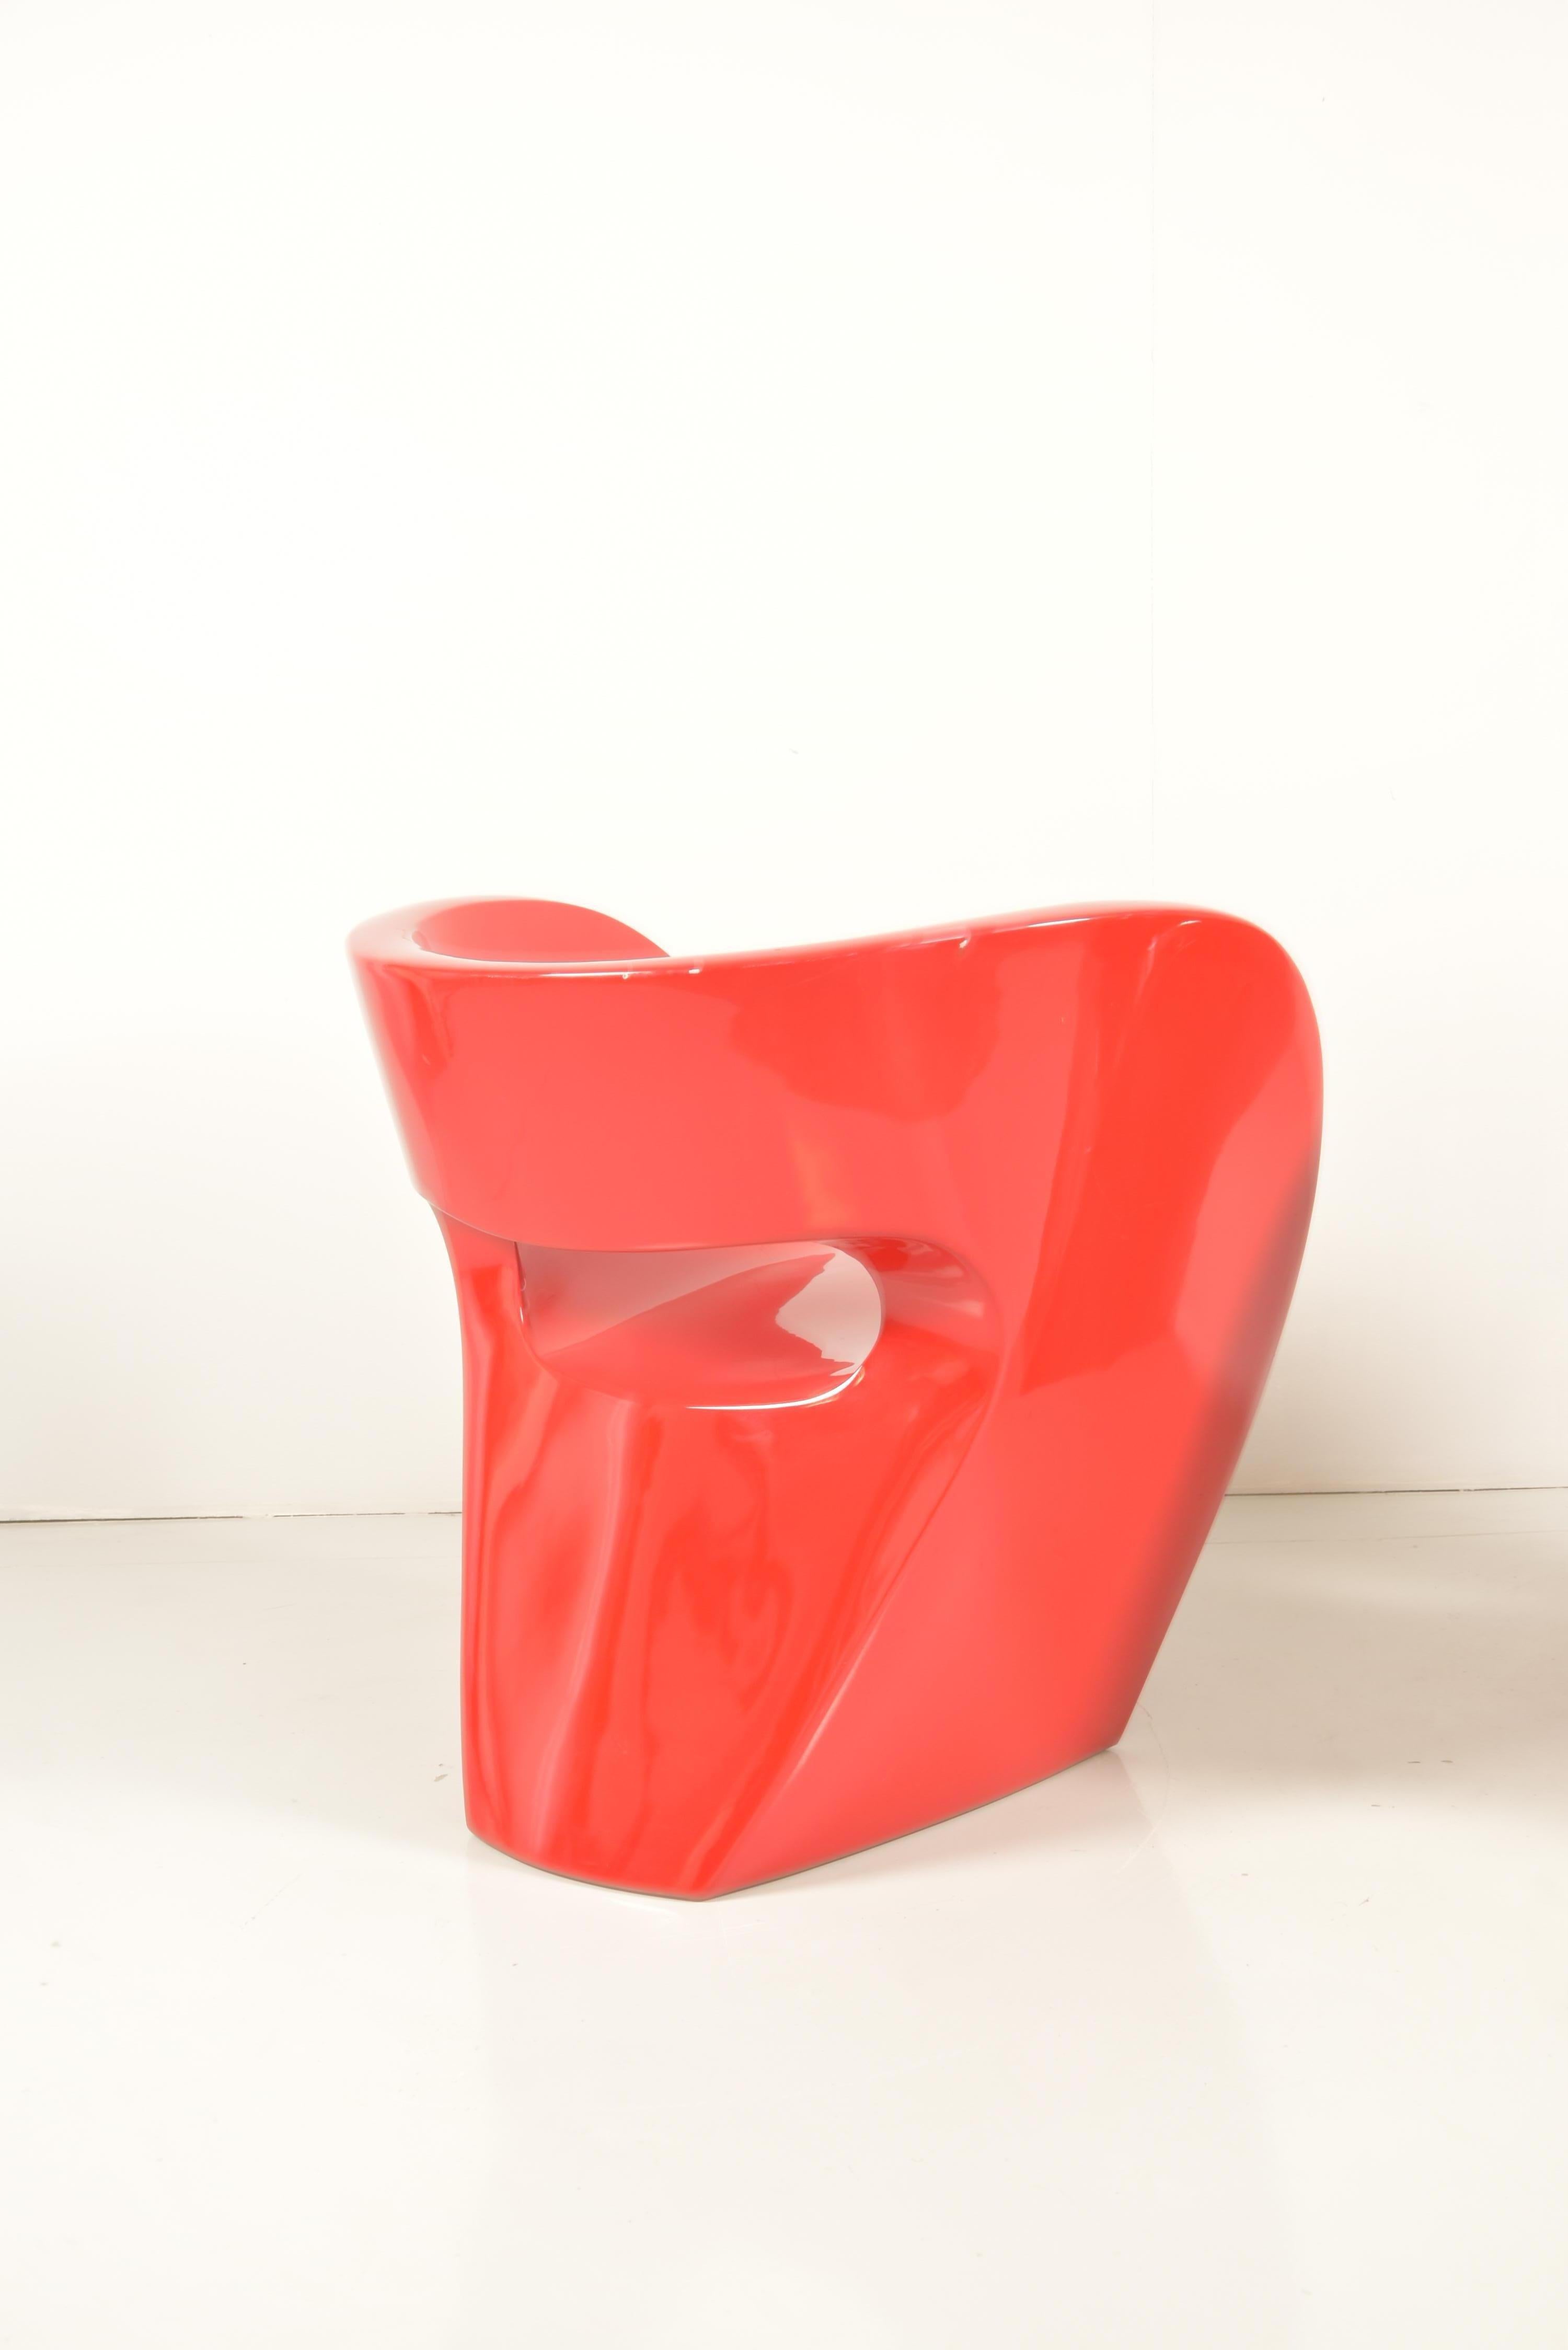 Pair of  Albert Red Armchairs by Ron Arad in 2000 for Moroso 2